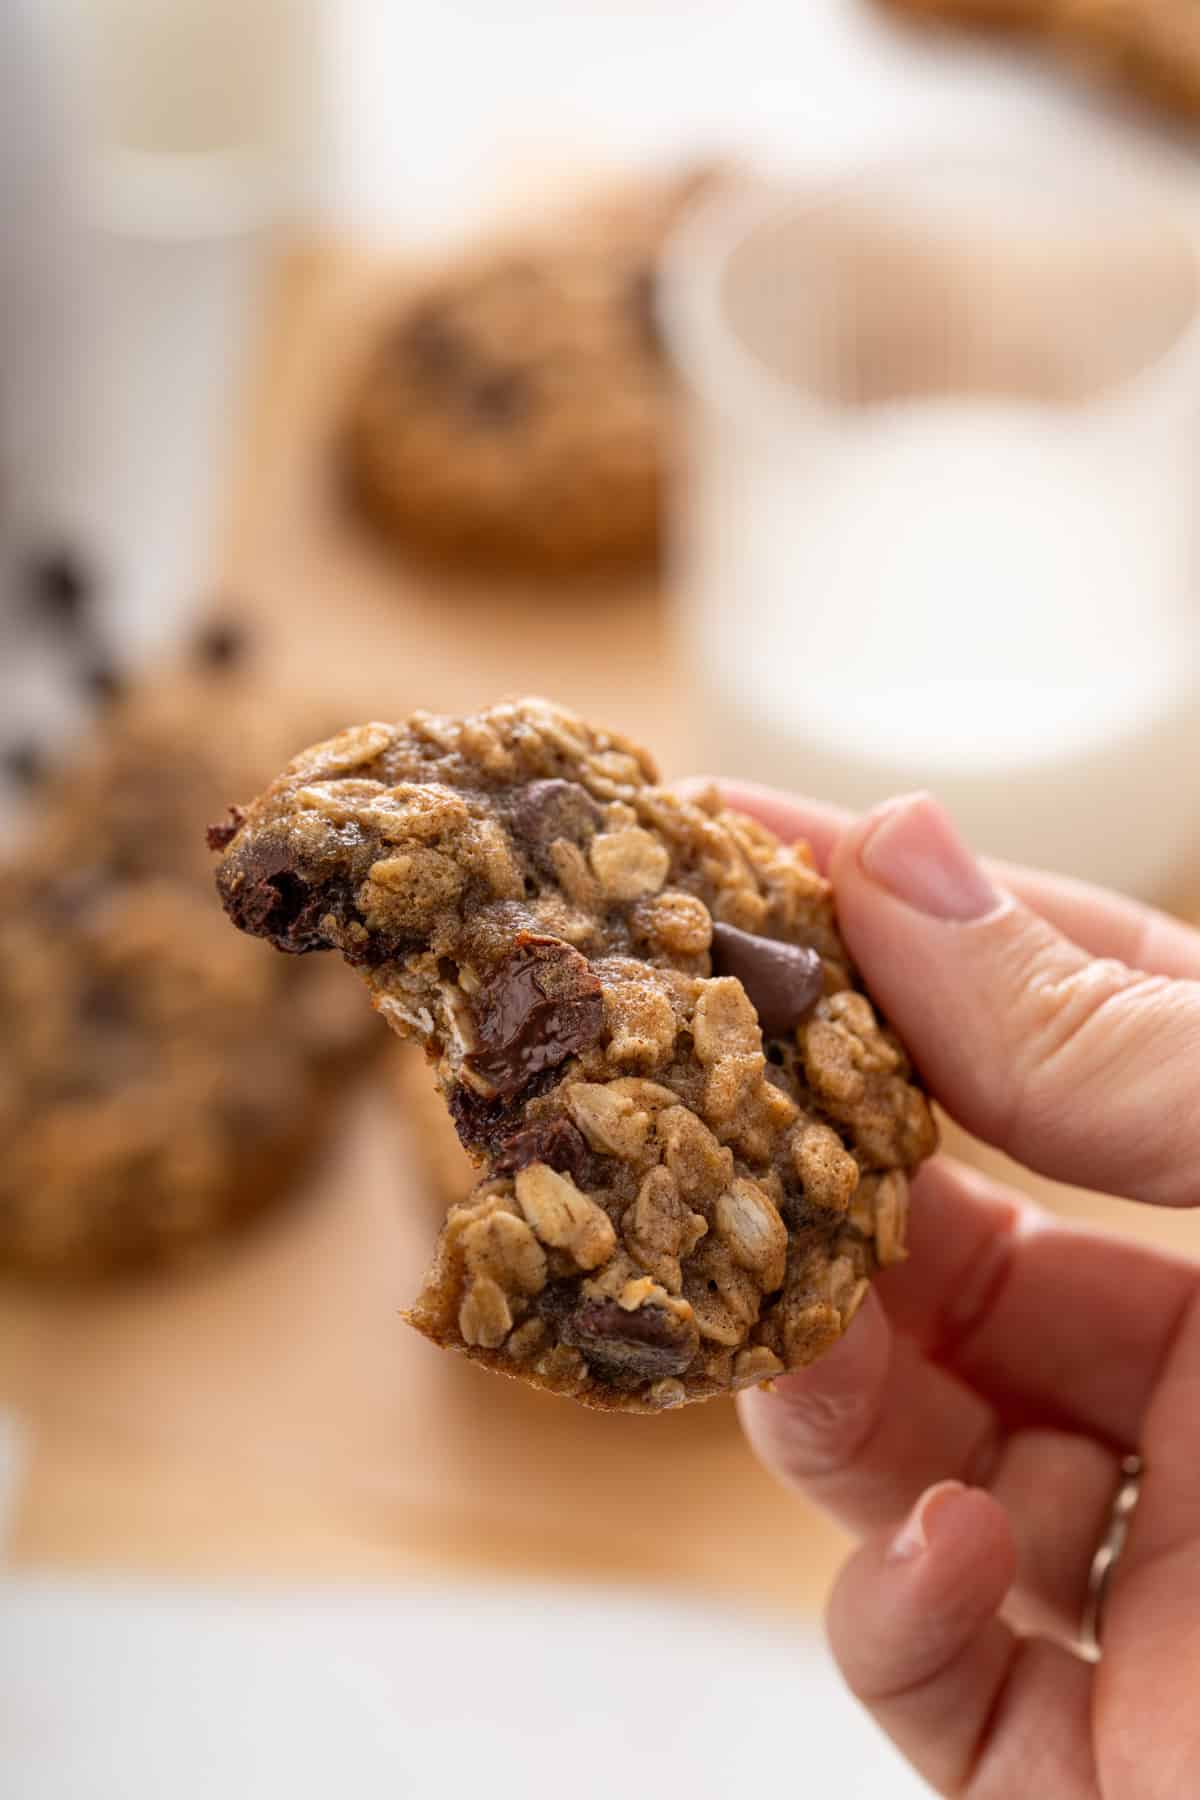 Hand holding up a banana oatmeal cookie with a bite taken from it.